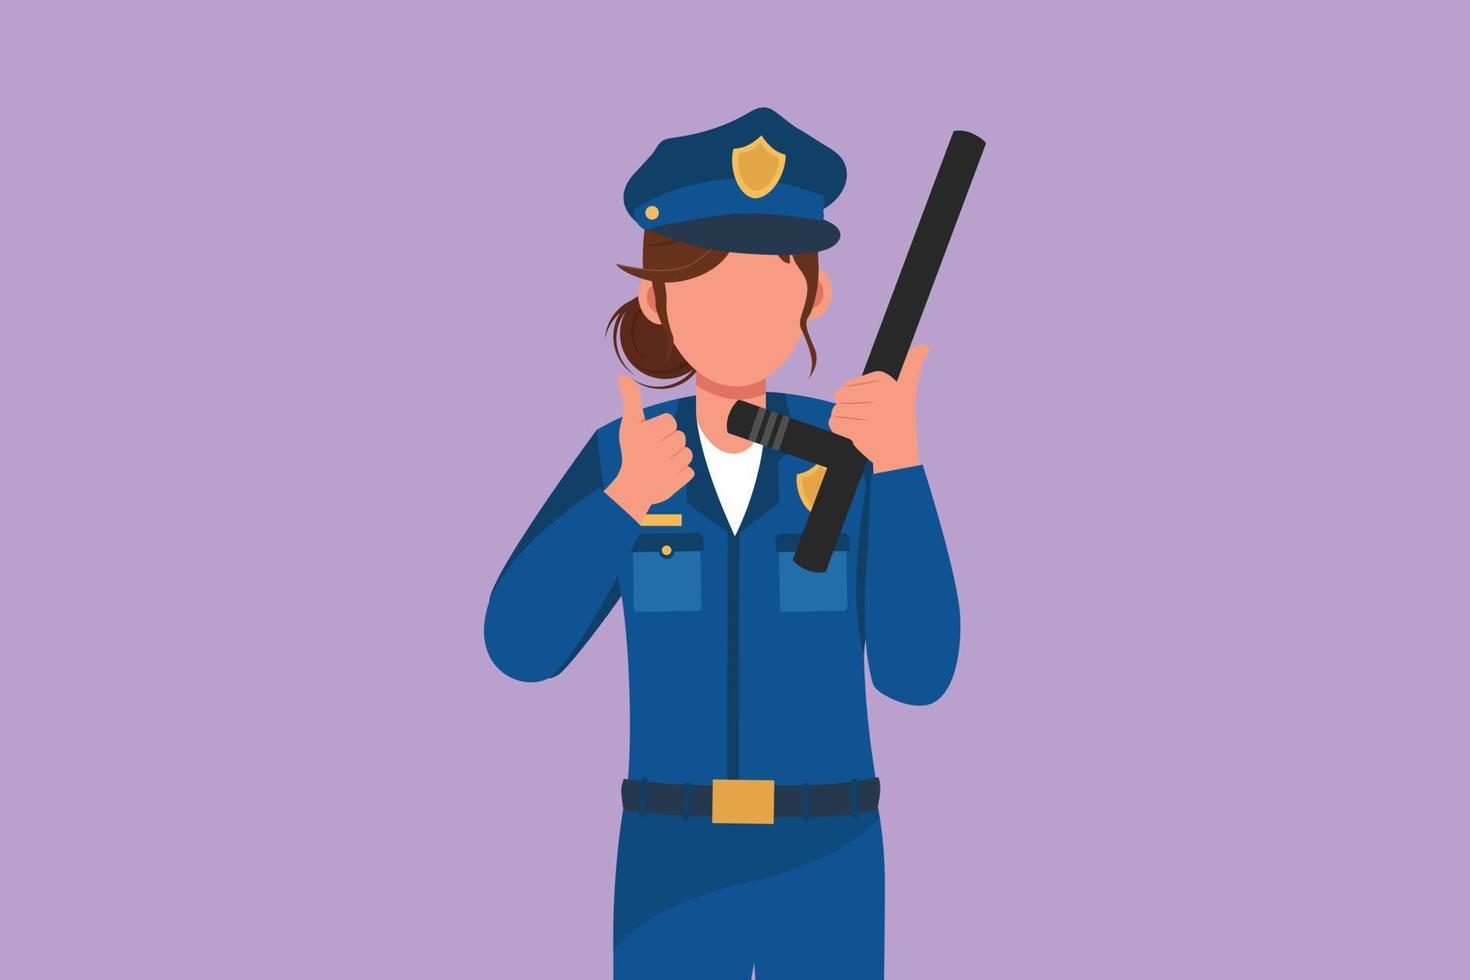 Cartoon flat style drawing attractive policewoman holding police baton with thumbs up gesture and in full uniform ready to enforce traffic discipline on the highway. Graphic design vector illustration